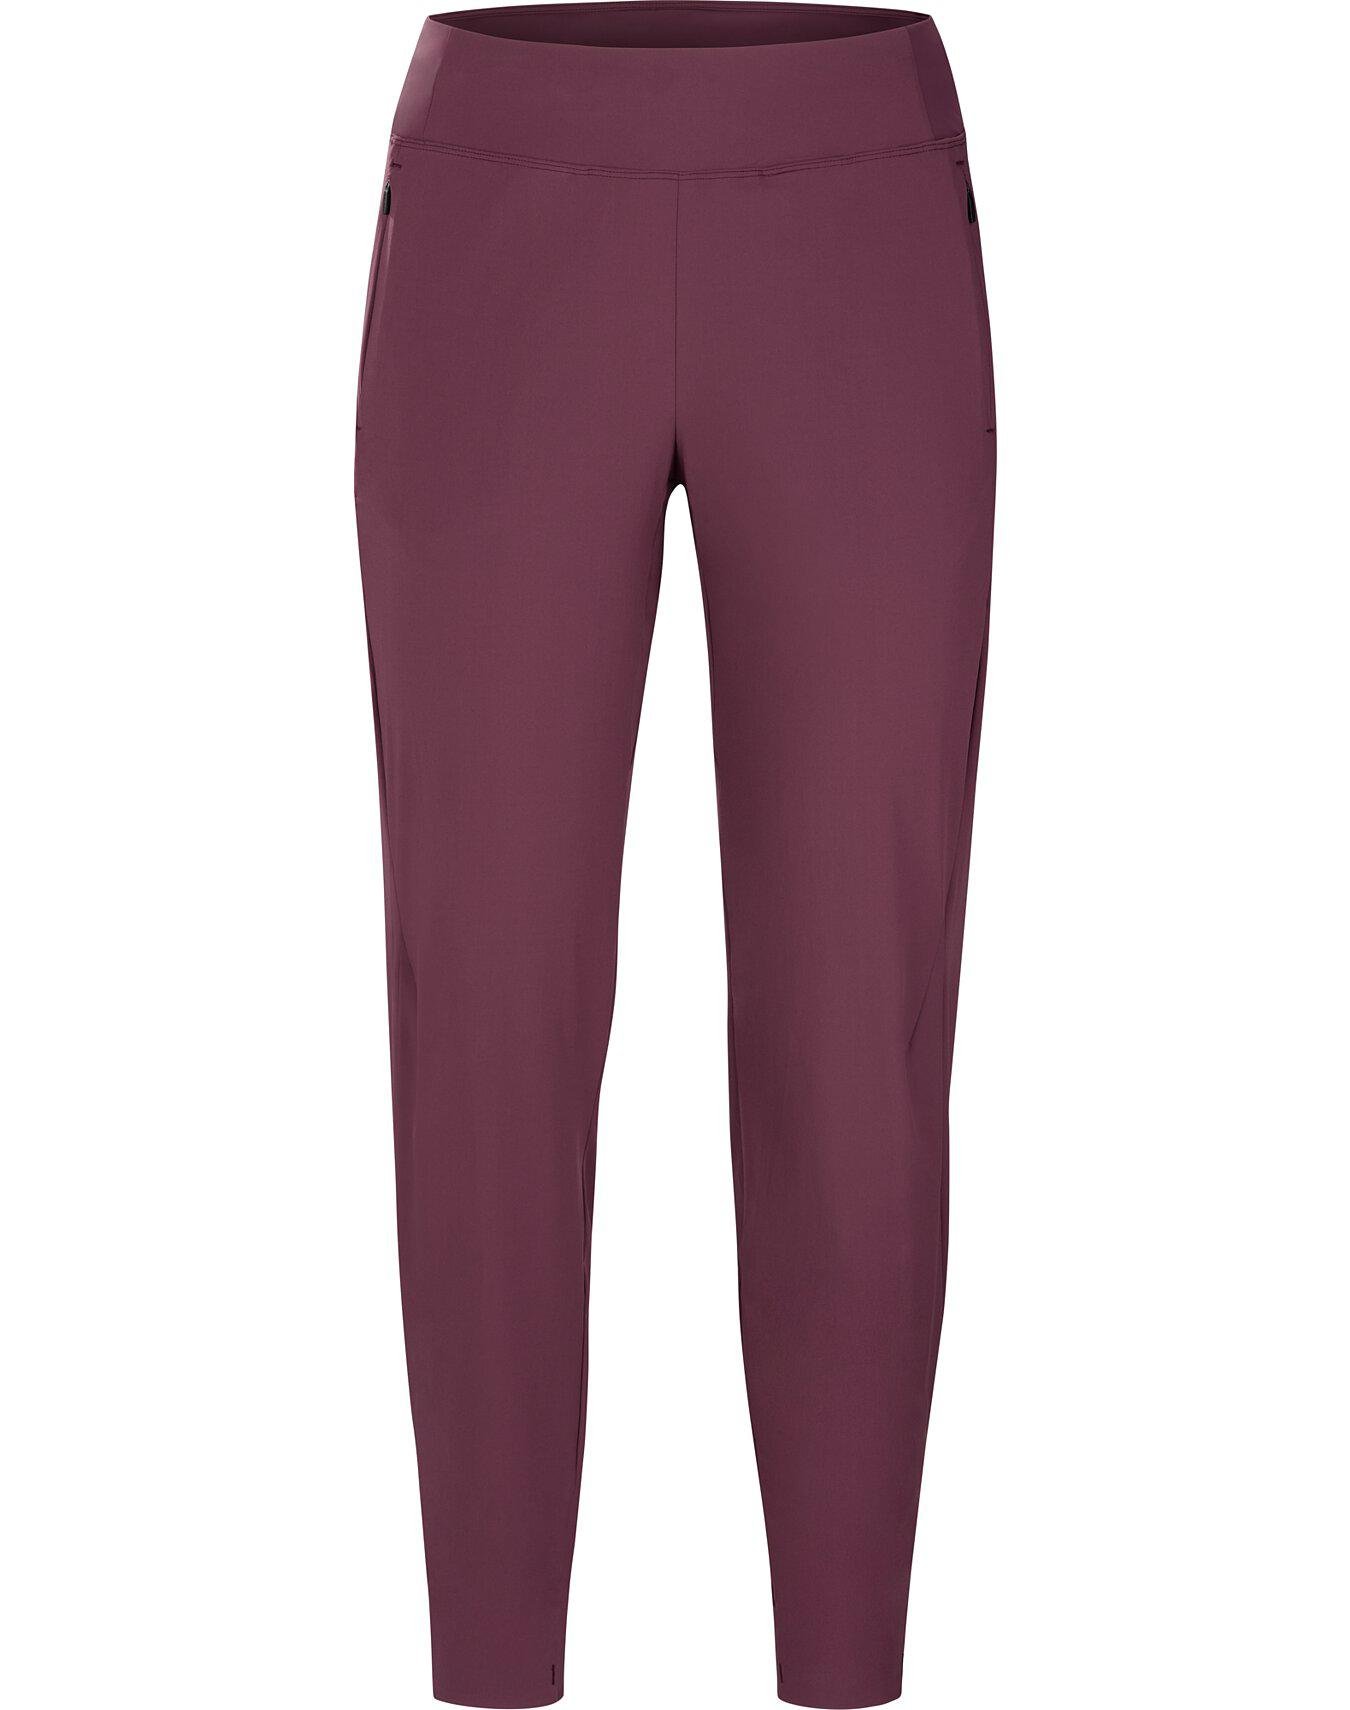 Incendo Pant Women's by ARC'TERYX | jellibeans